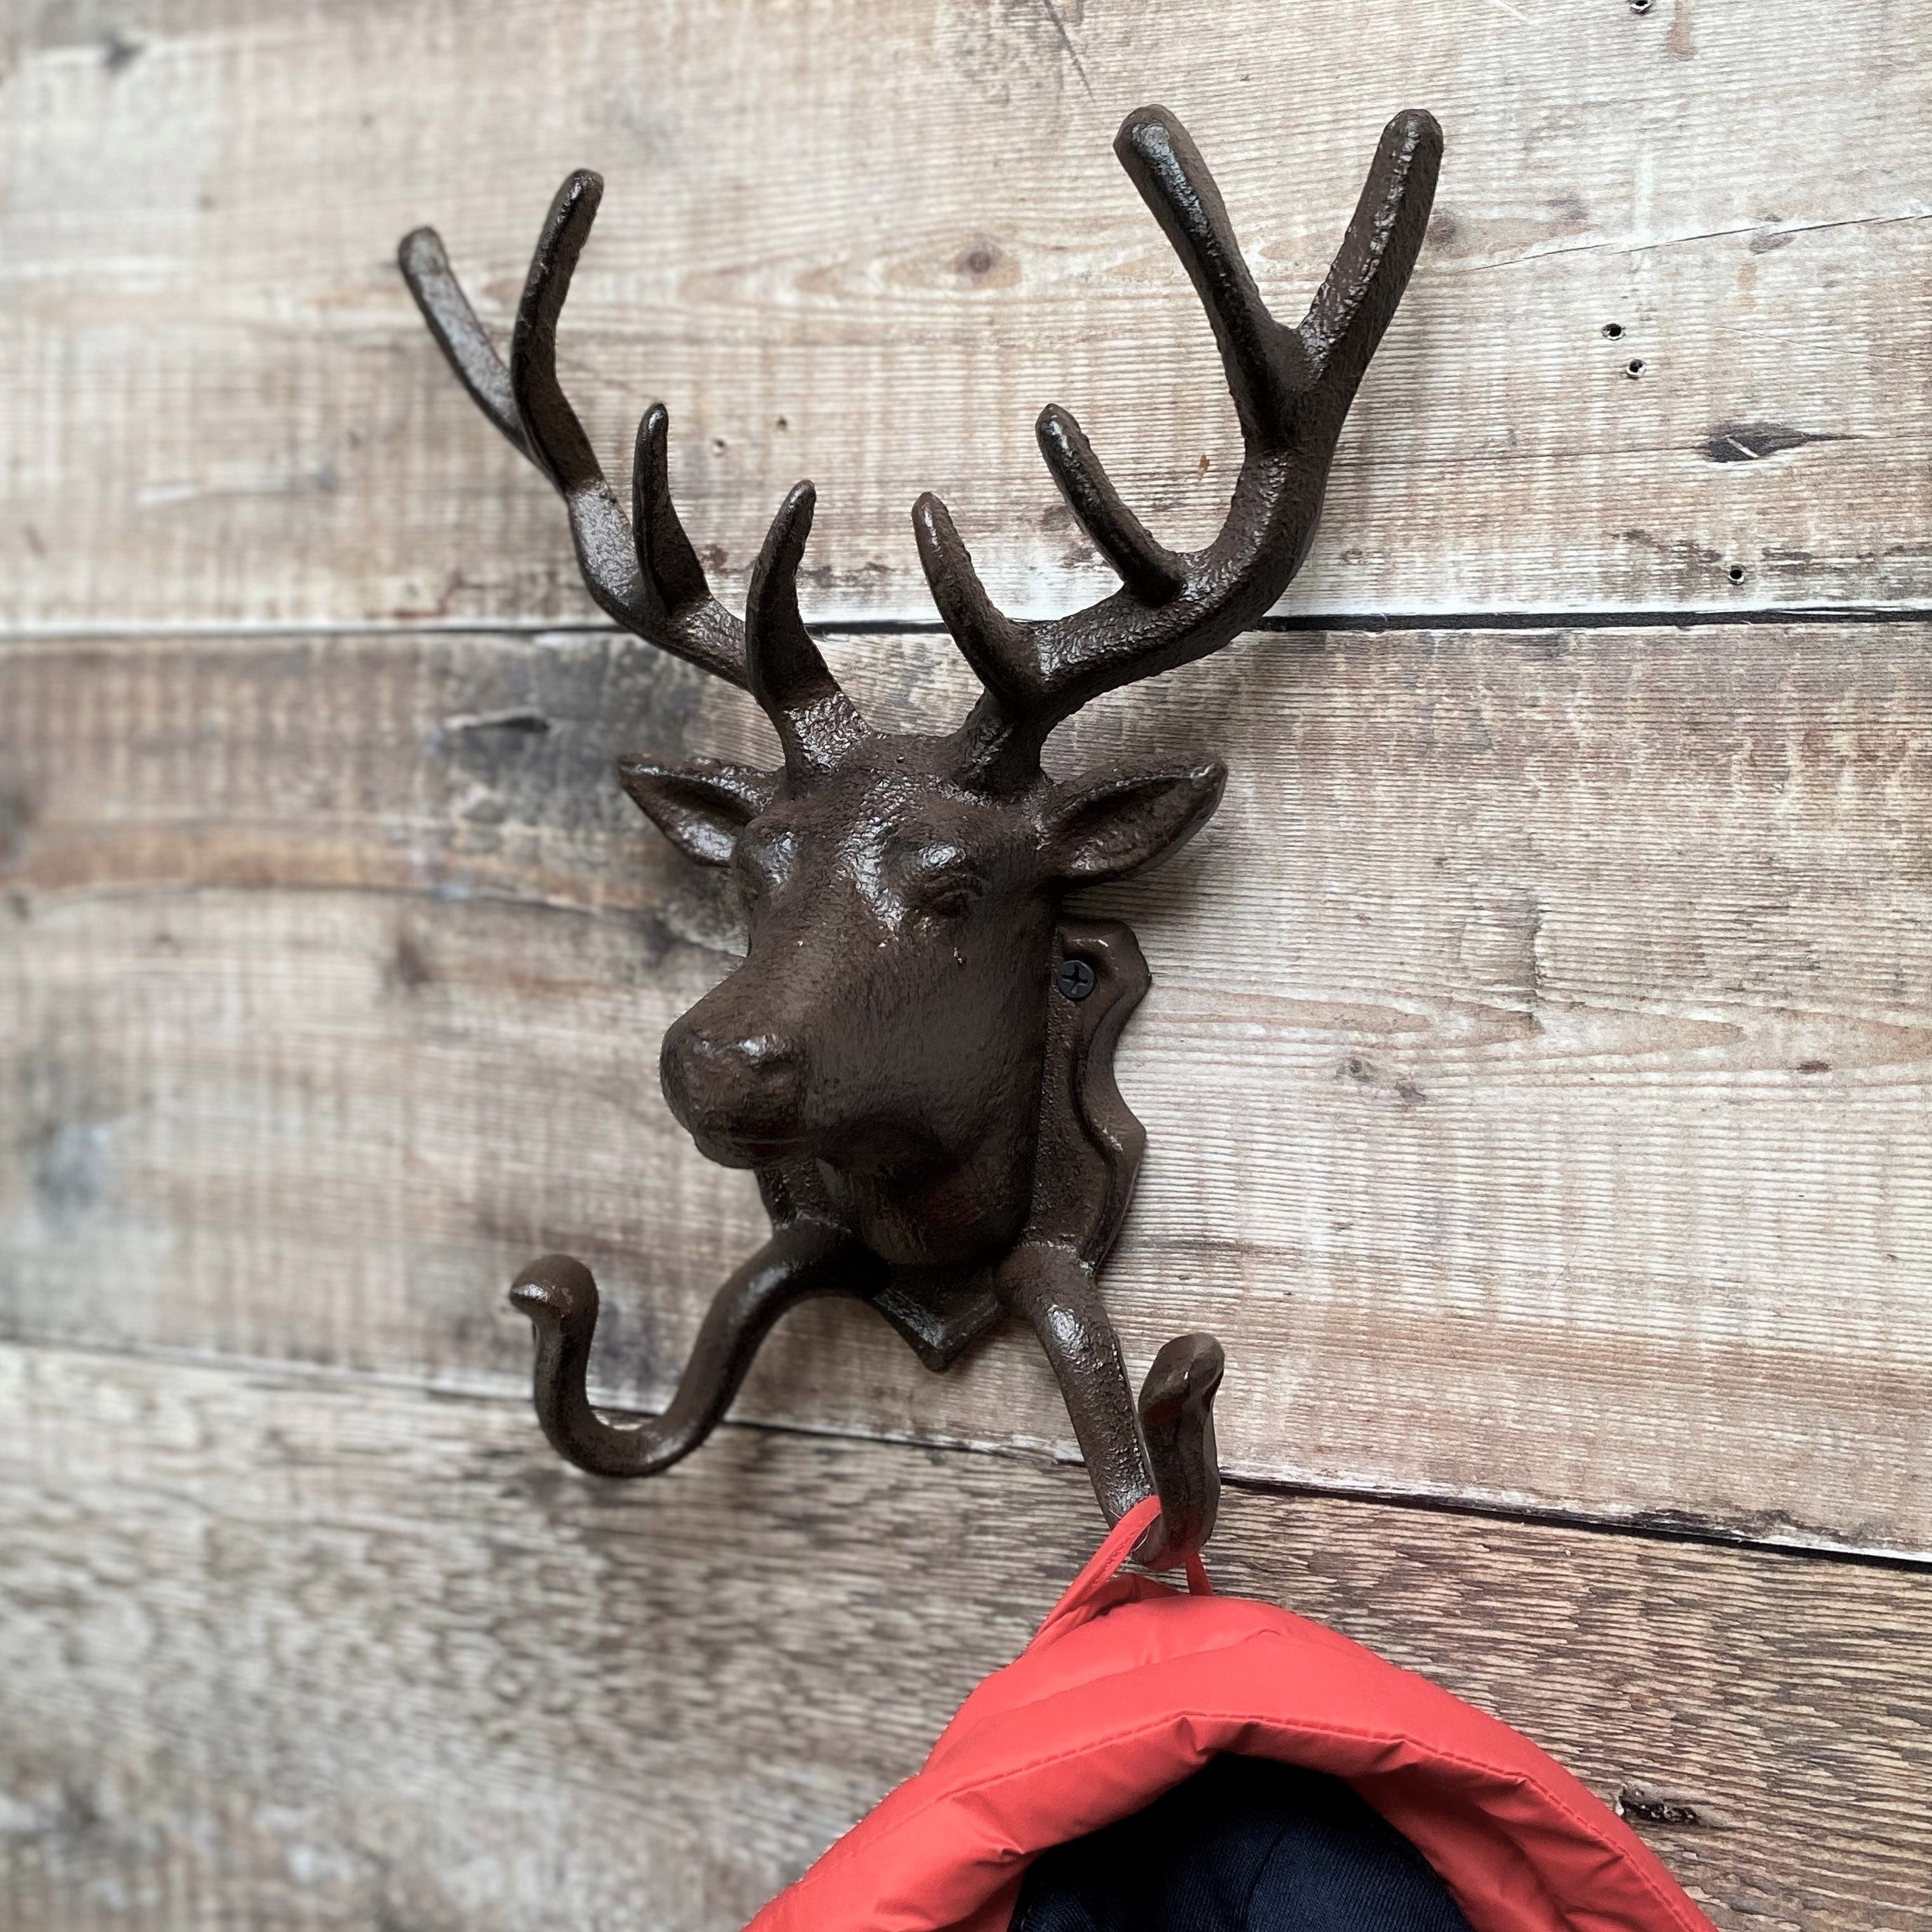 Cast Iron Stag Head Wall Coat Hook Hanger by Garden Selections